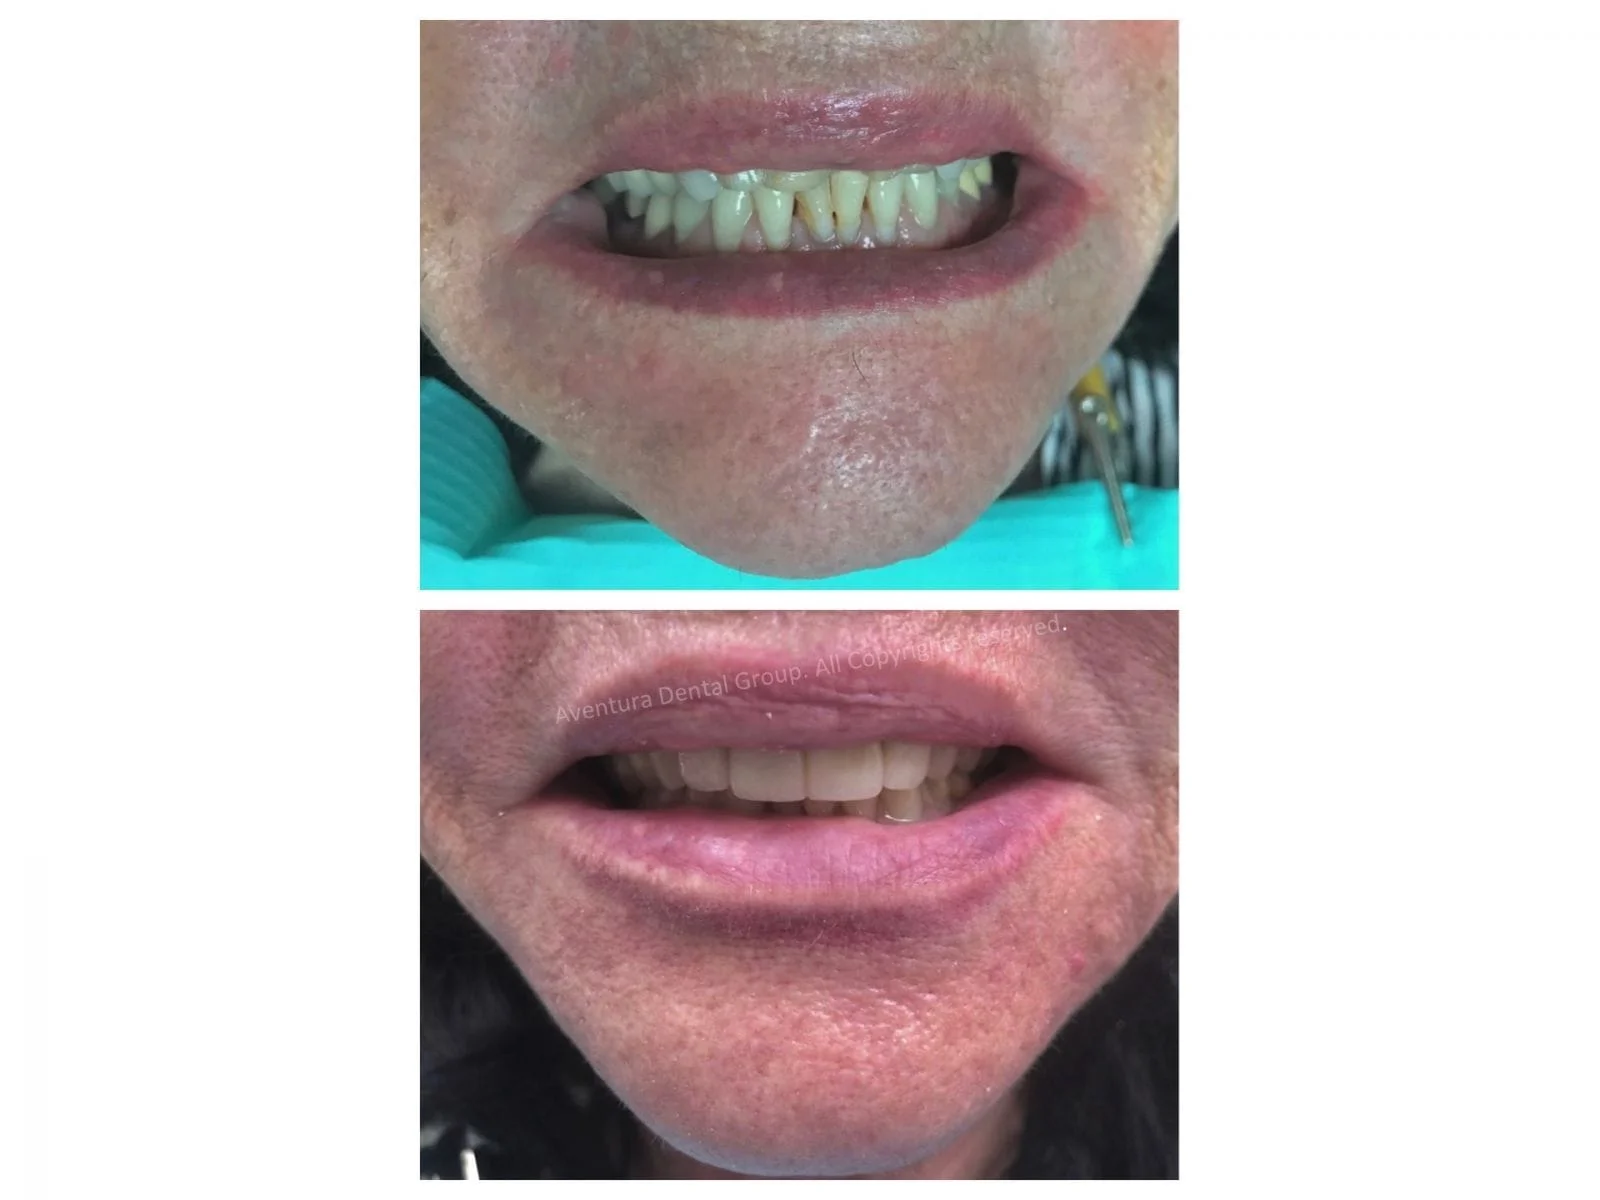 Aventura Dental Group is proud of another succesful full mouth restoration treatment. The patient came in and always wanted to see her upper teeth when smiling. We made that happen by raising her bite and give her the natural smile she wanted for a long time. The patient was very happy with the results. For a virtual aesthetic and cosmetic consultation with one of our award winning doctors DM us @aventuradentalgroup or call us at 305-935-4030.  Come and experience the difference in quality. We proudly serve the Aventura community since 1985. We are your local cosmetic dentist in Aventura, Florida. 